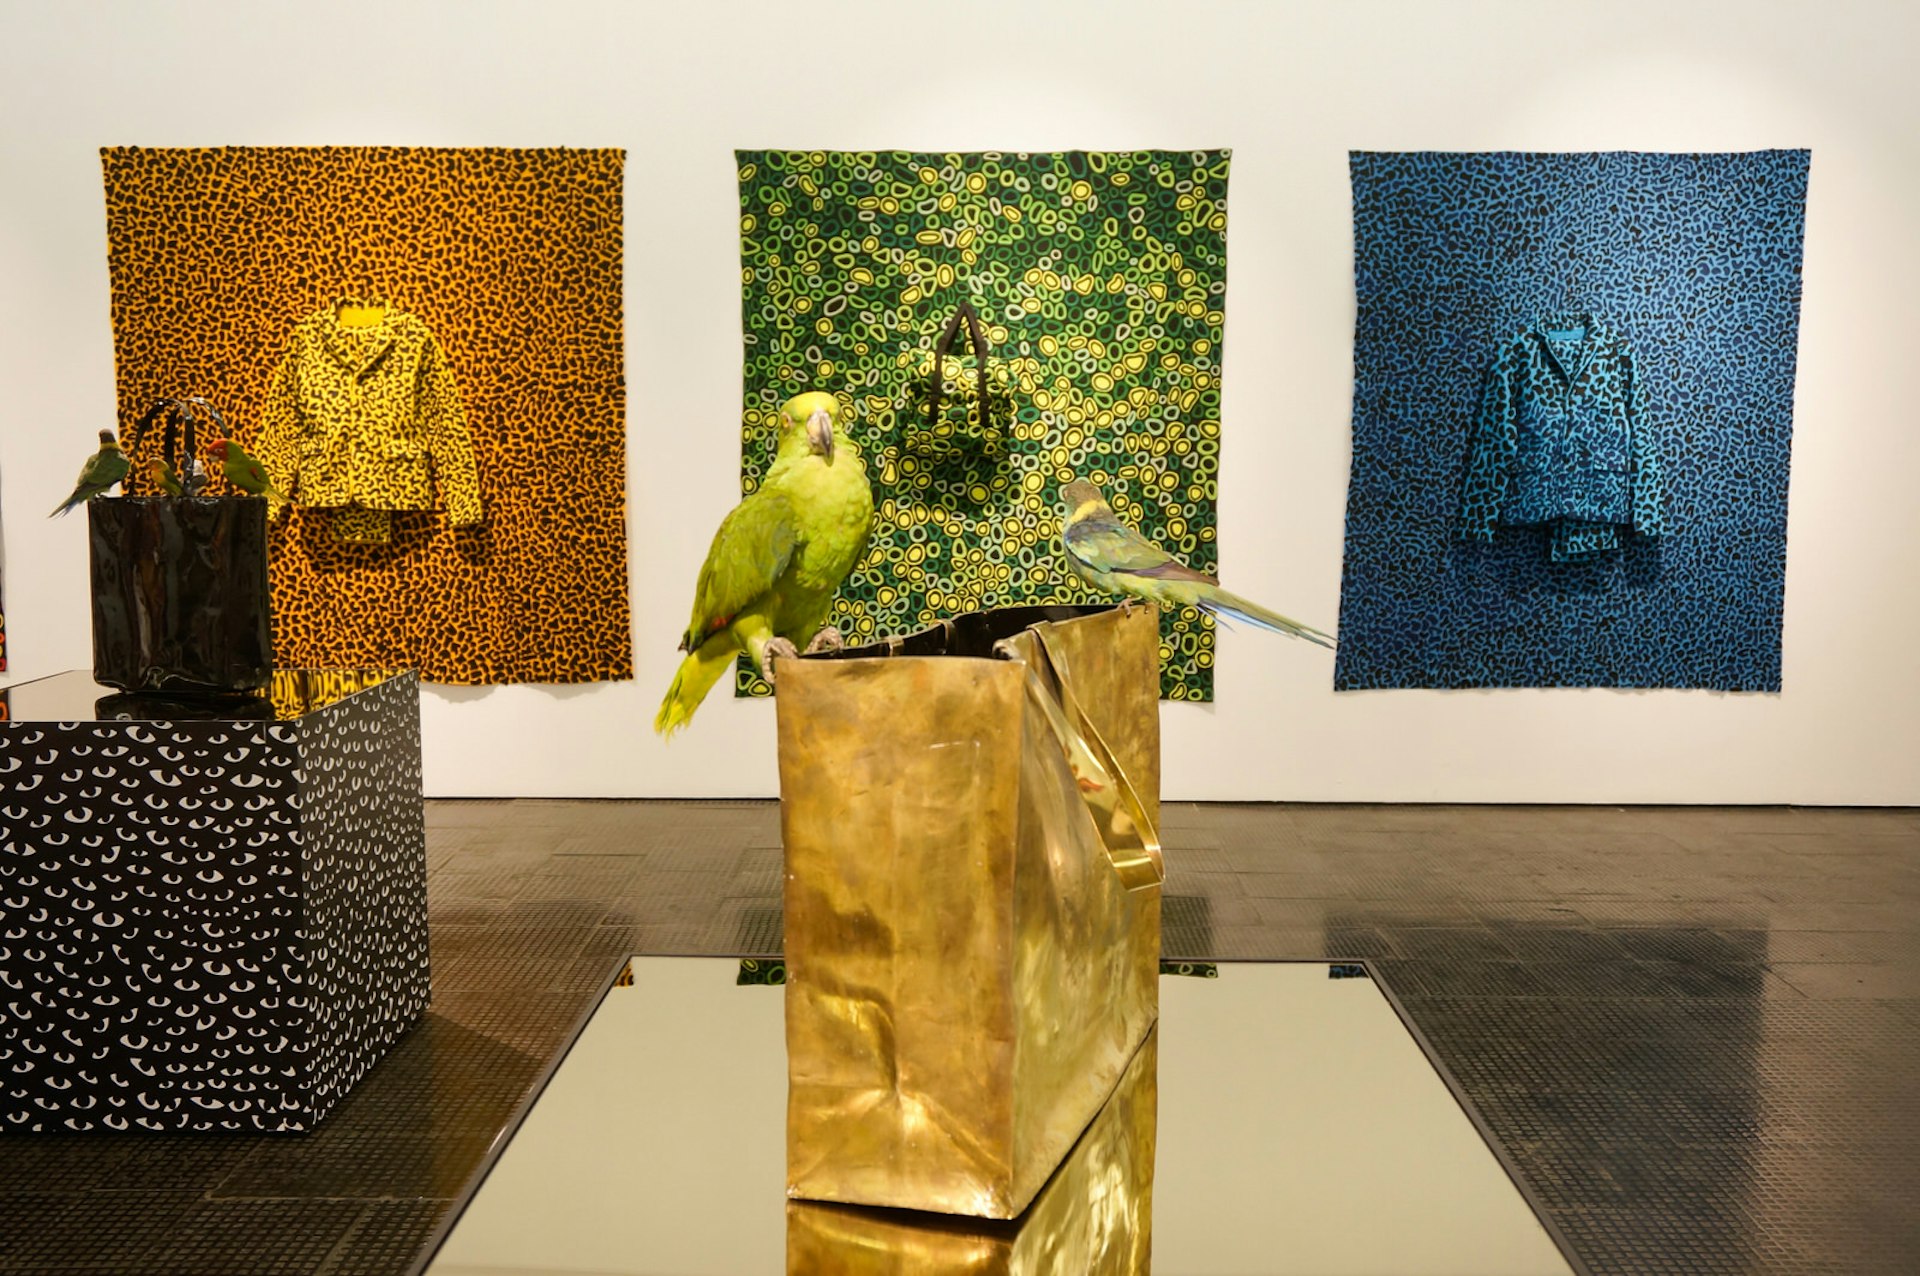 Two bright green parakeets (stuffed) sit atop a gilded paper shopping bag within the SMAC Gallery. On the white wall behind are three colourful pieces of work, each a large square of different fabric with a piece of clothing (made of matching fabric) hanging in the centre © Monica Suma / Lonely Planet